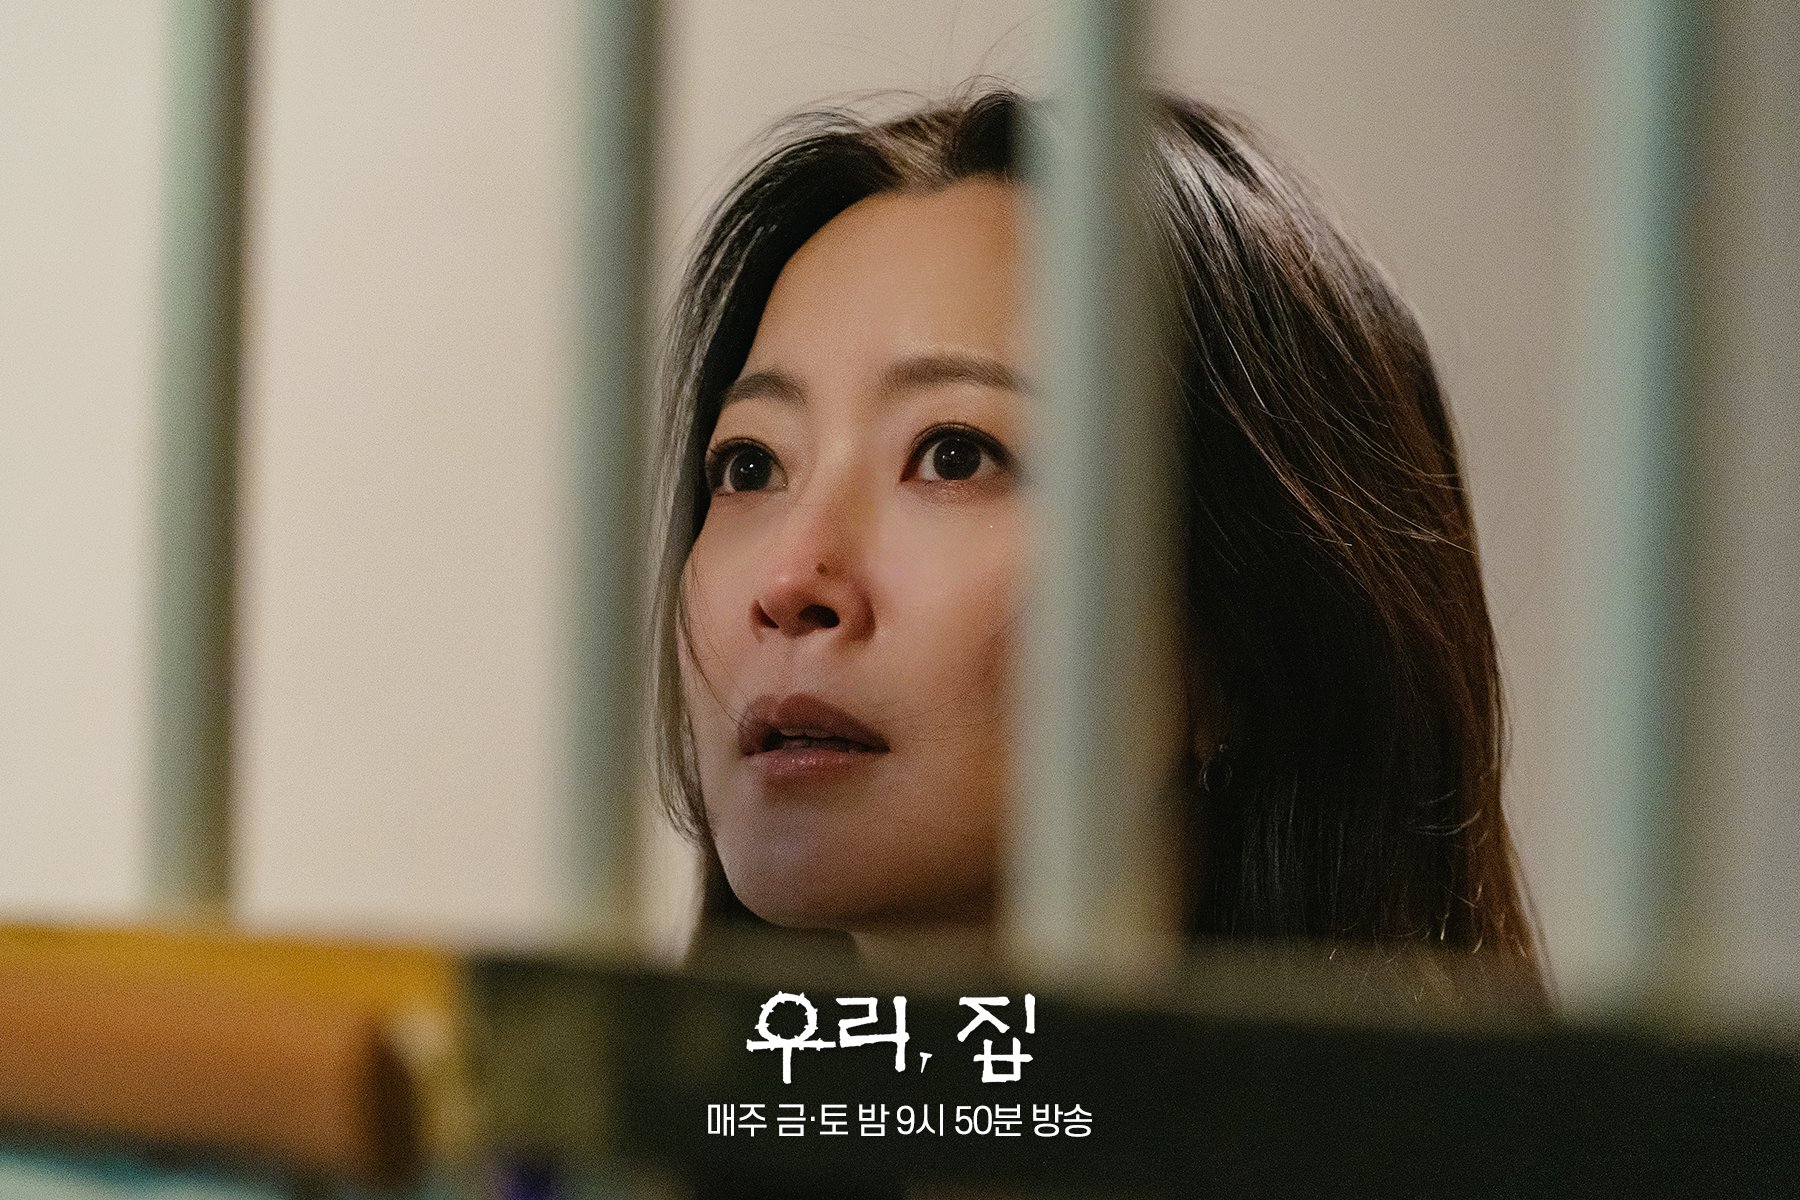 Kim Hee Sun And Lee Hye Young Exchange Meaningful Gazes In Jail On 